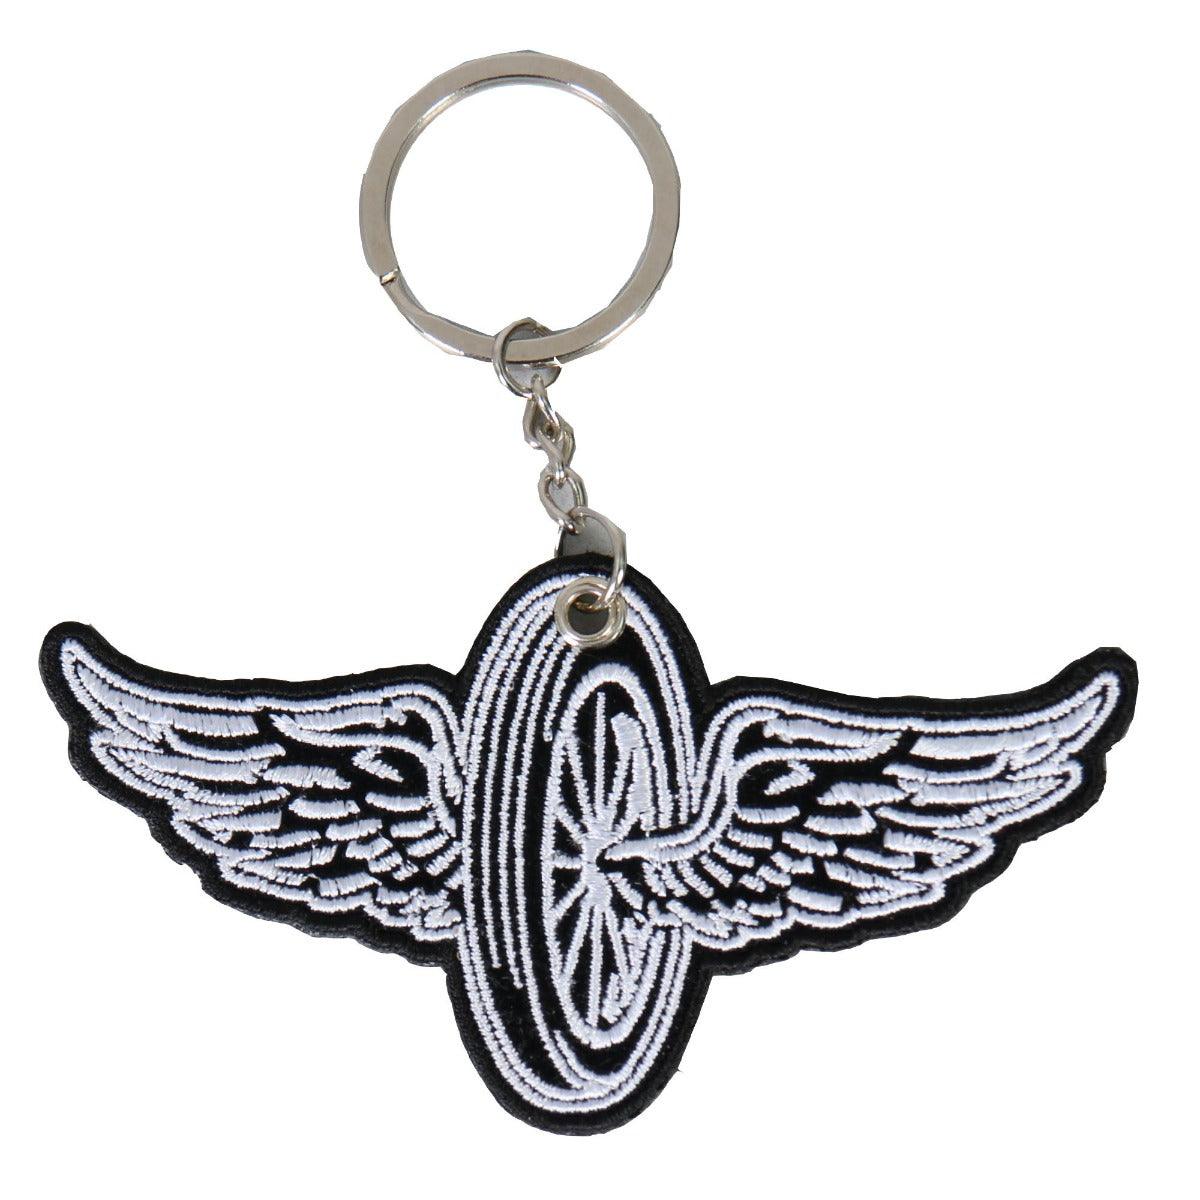 Hot Leathers Flying Wheel Embroidered Key Chain - American Legend Rider